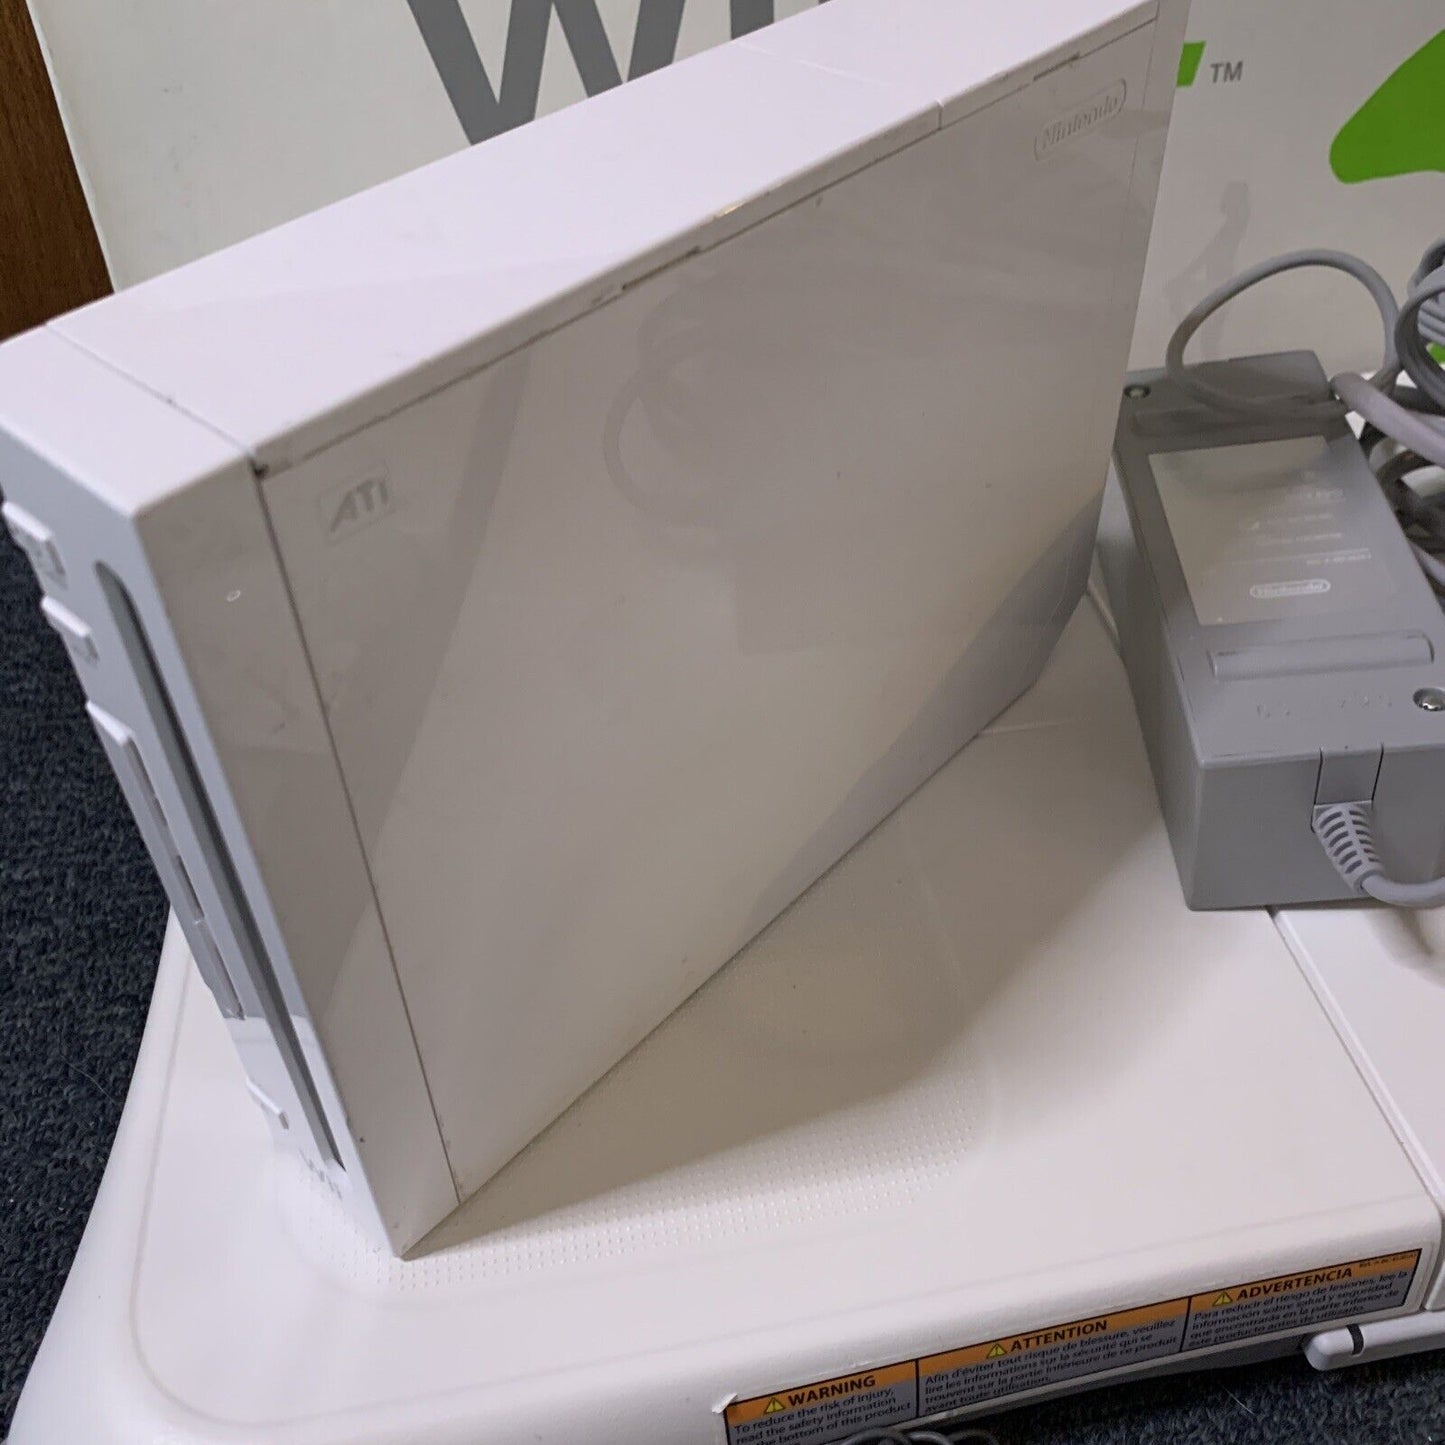 Nintendo Wii Fit Bundle with Balance Board